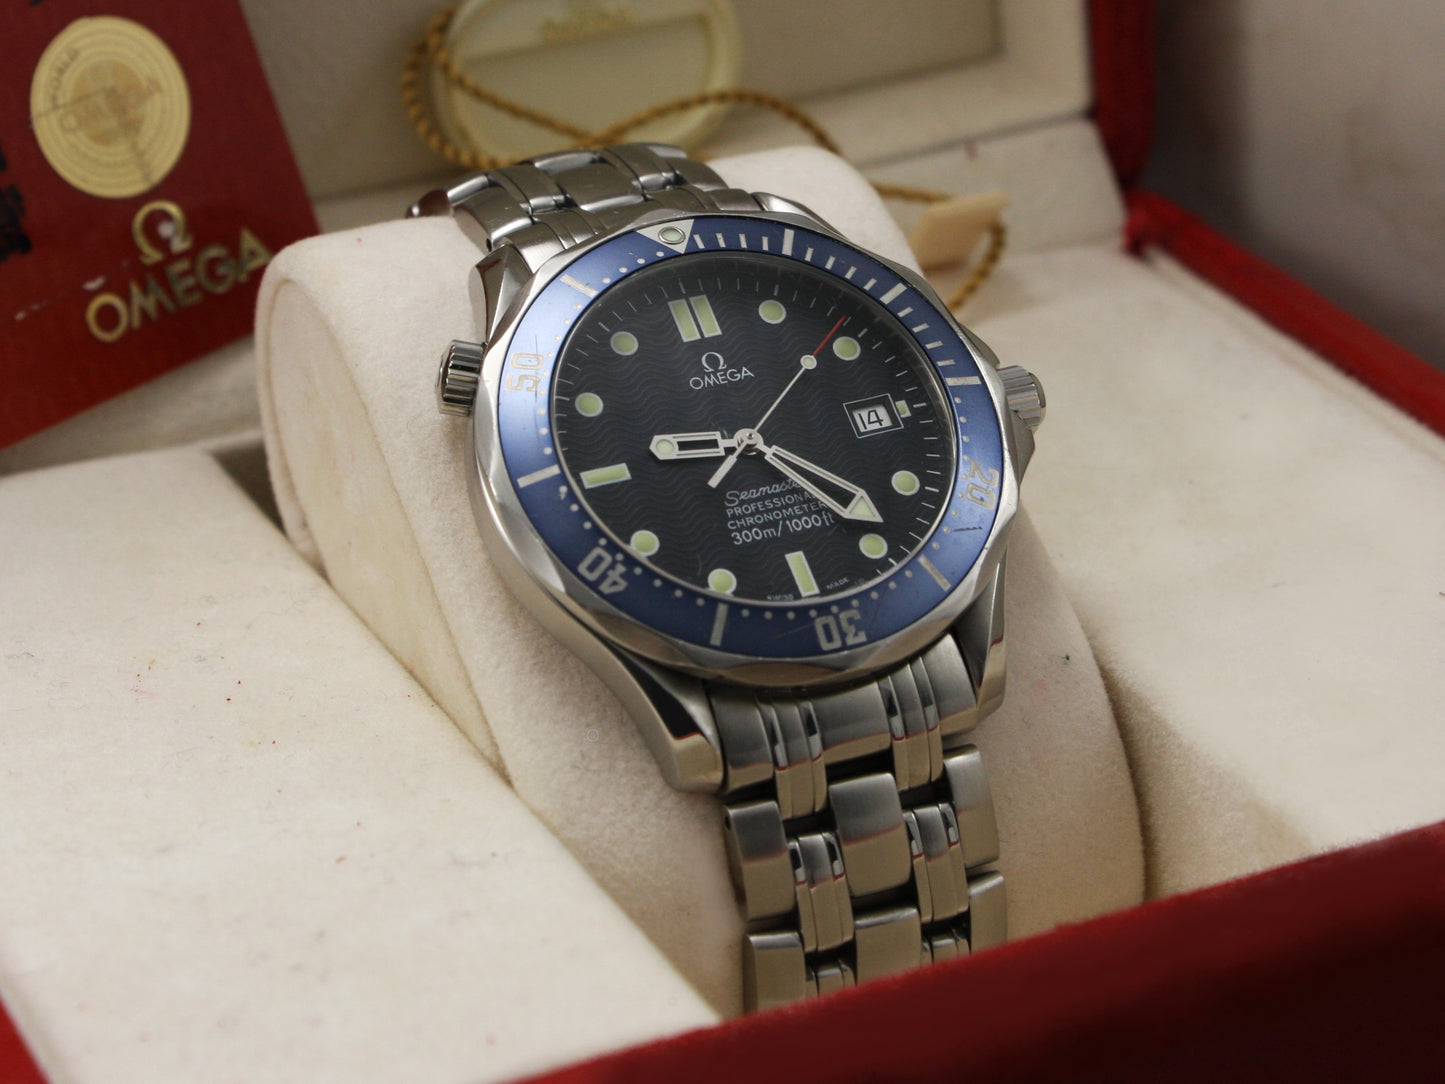 Omega Seamaster Professional Diver 300M Automatic 25318000 Steel - 41MM - Blue Dial - 2004